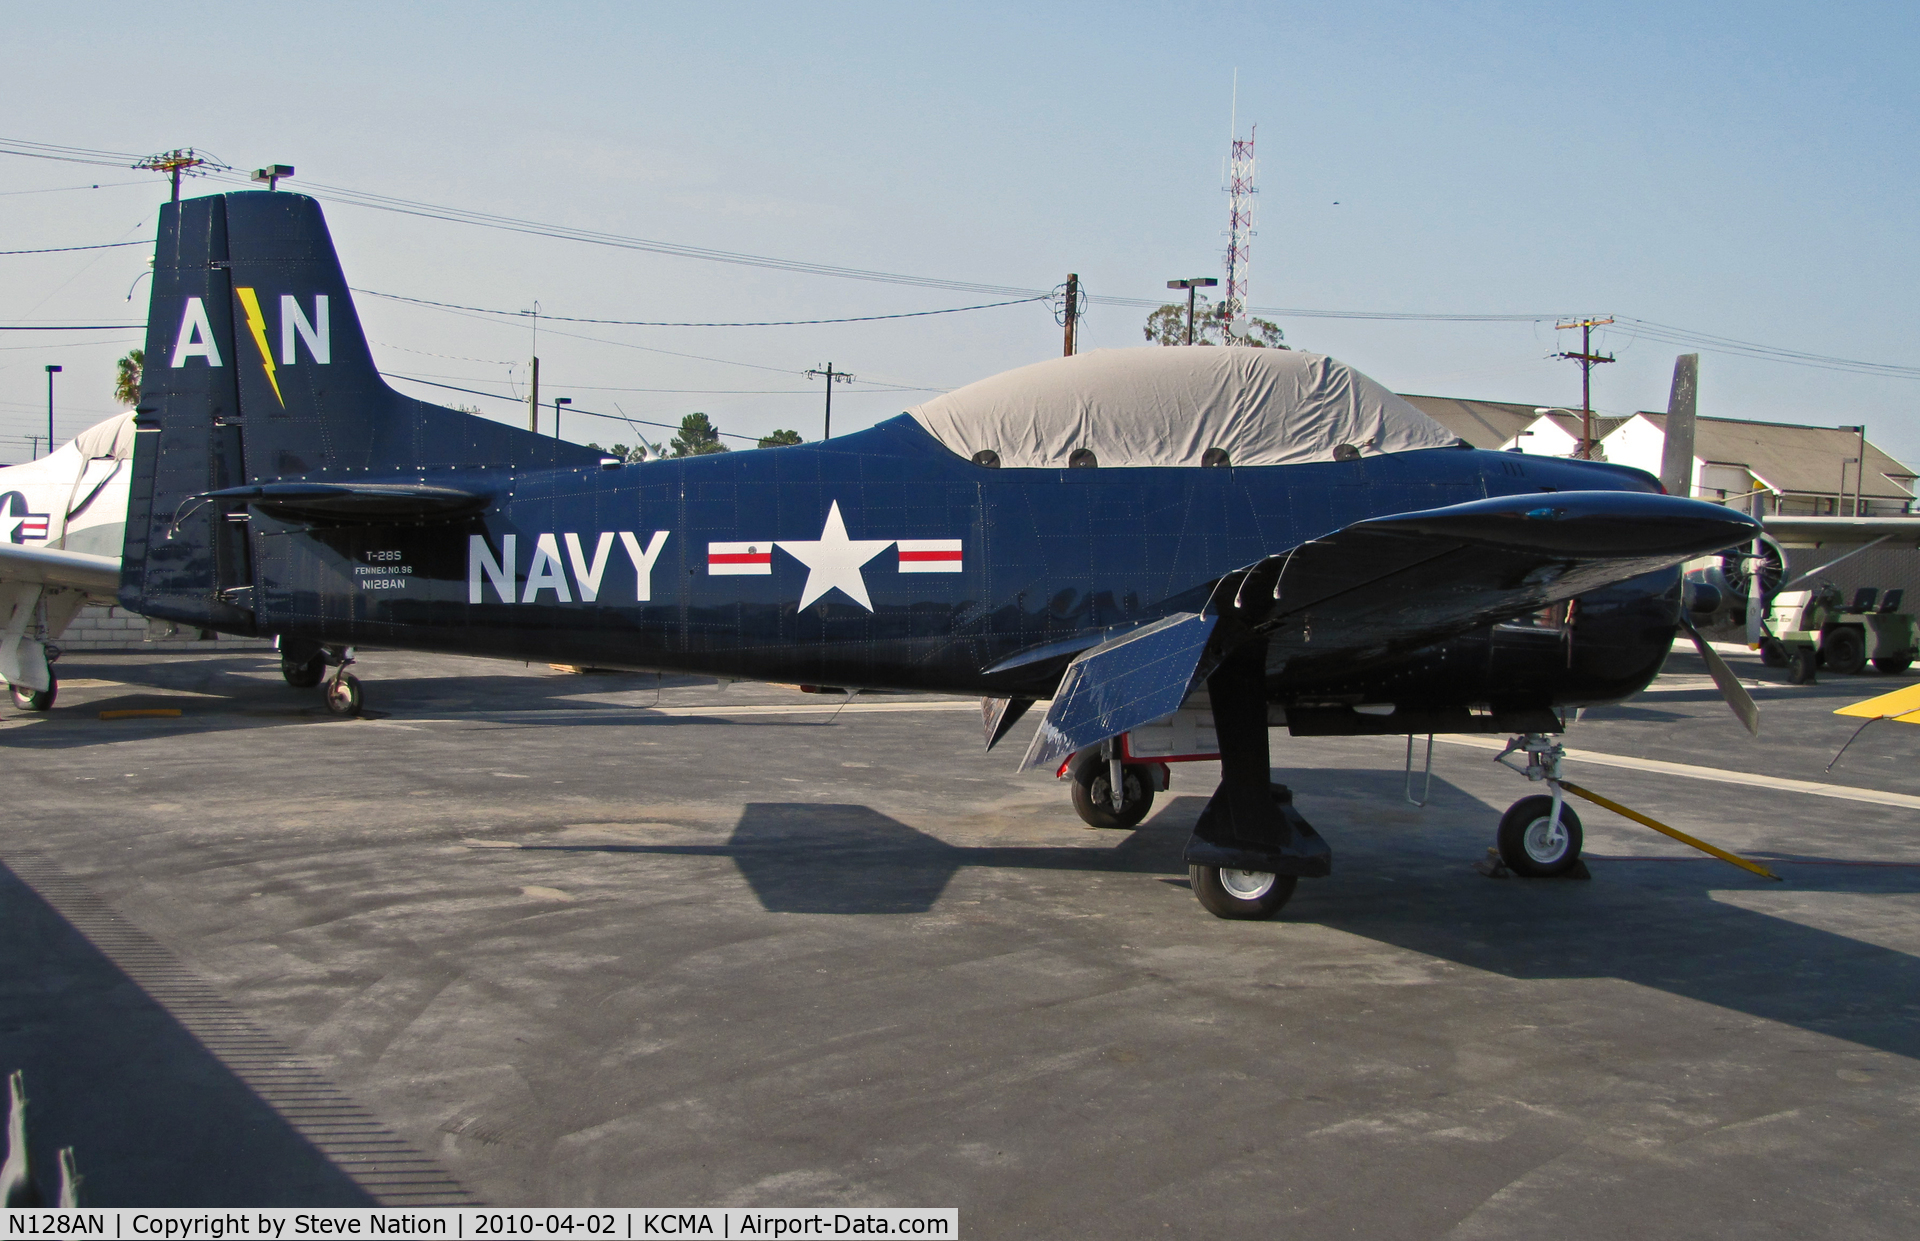 N128AN, 1951 North American T-28S Fennec C/N 96, T-28S Fennec in US Navy sea blue colors and pseudo- 